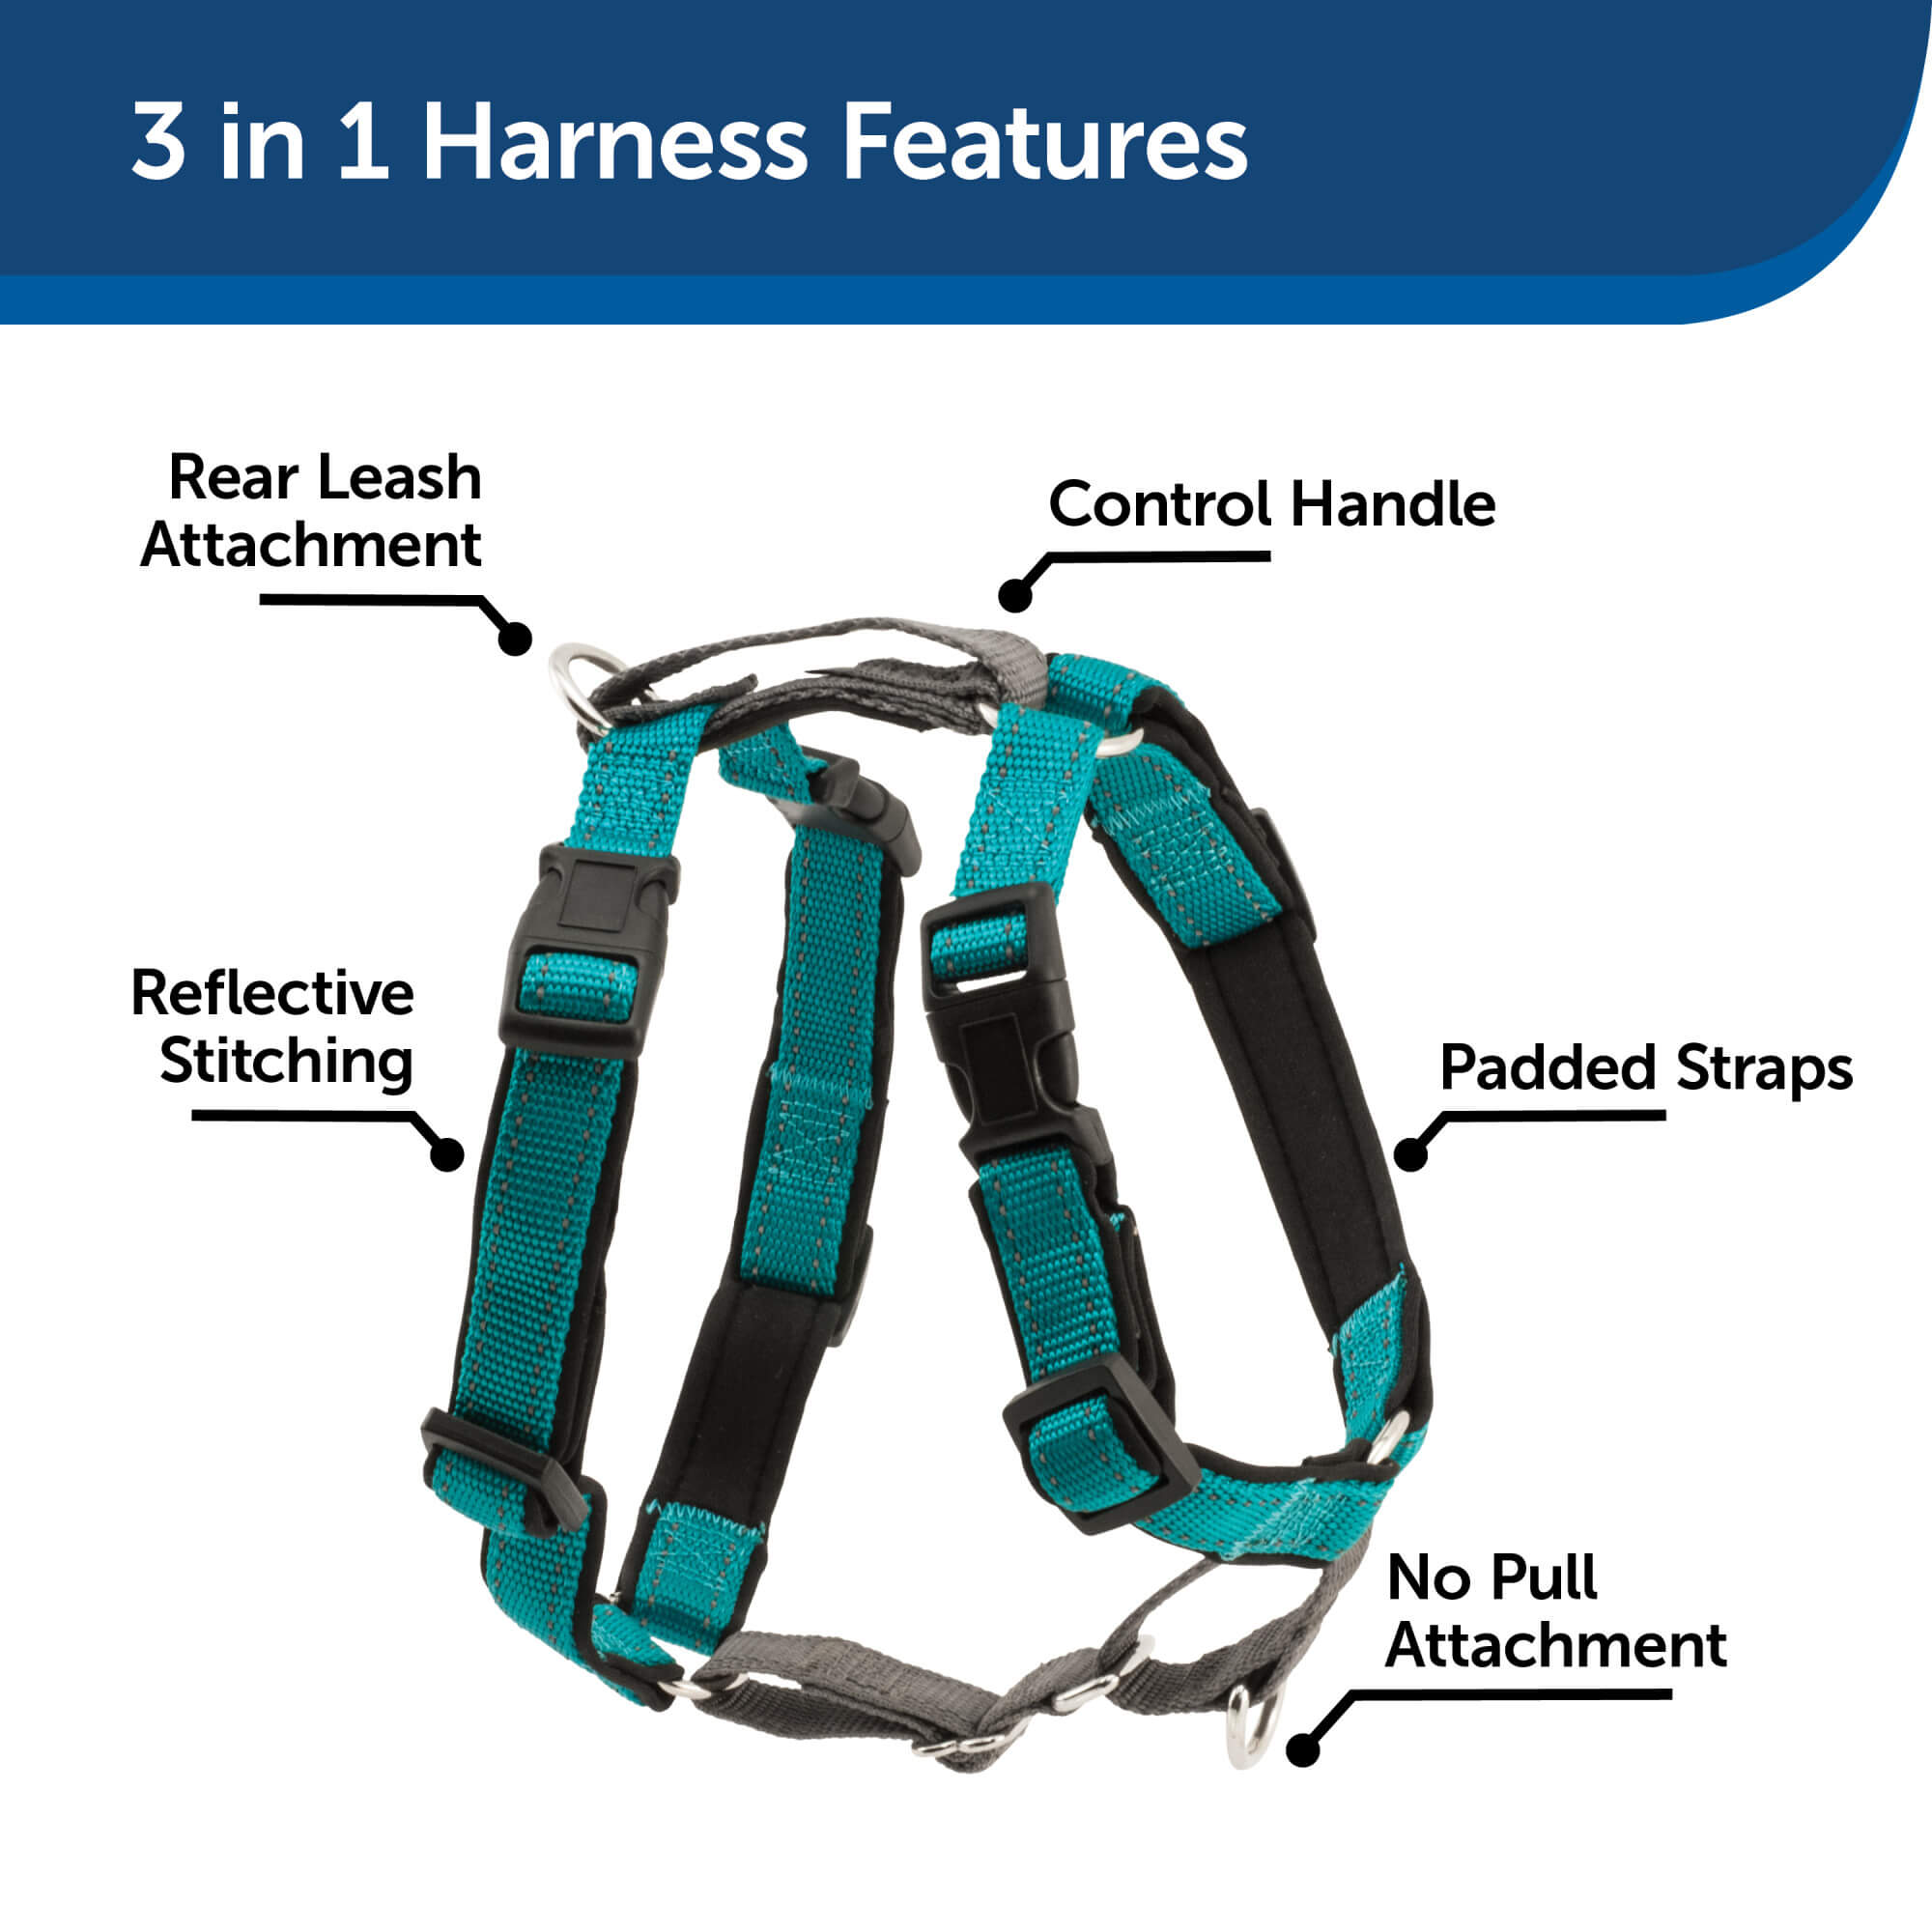 PetSafe 3 in 1 harness features